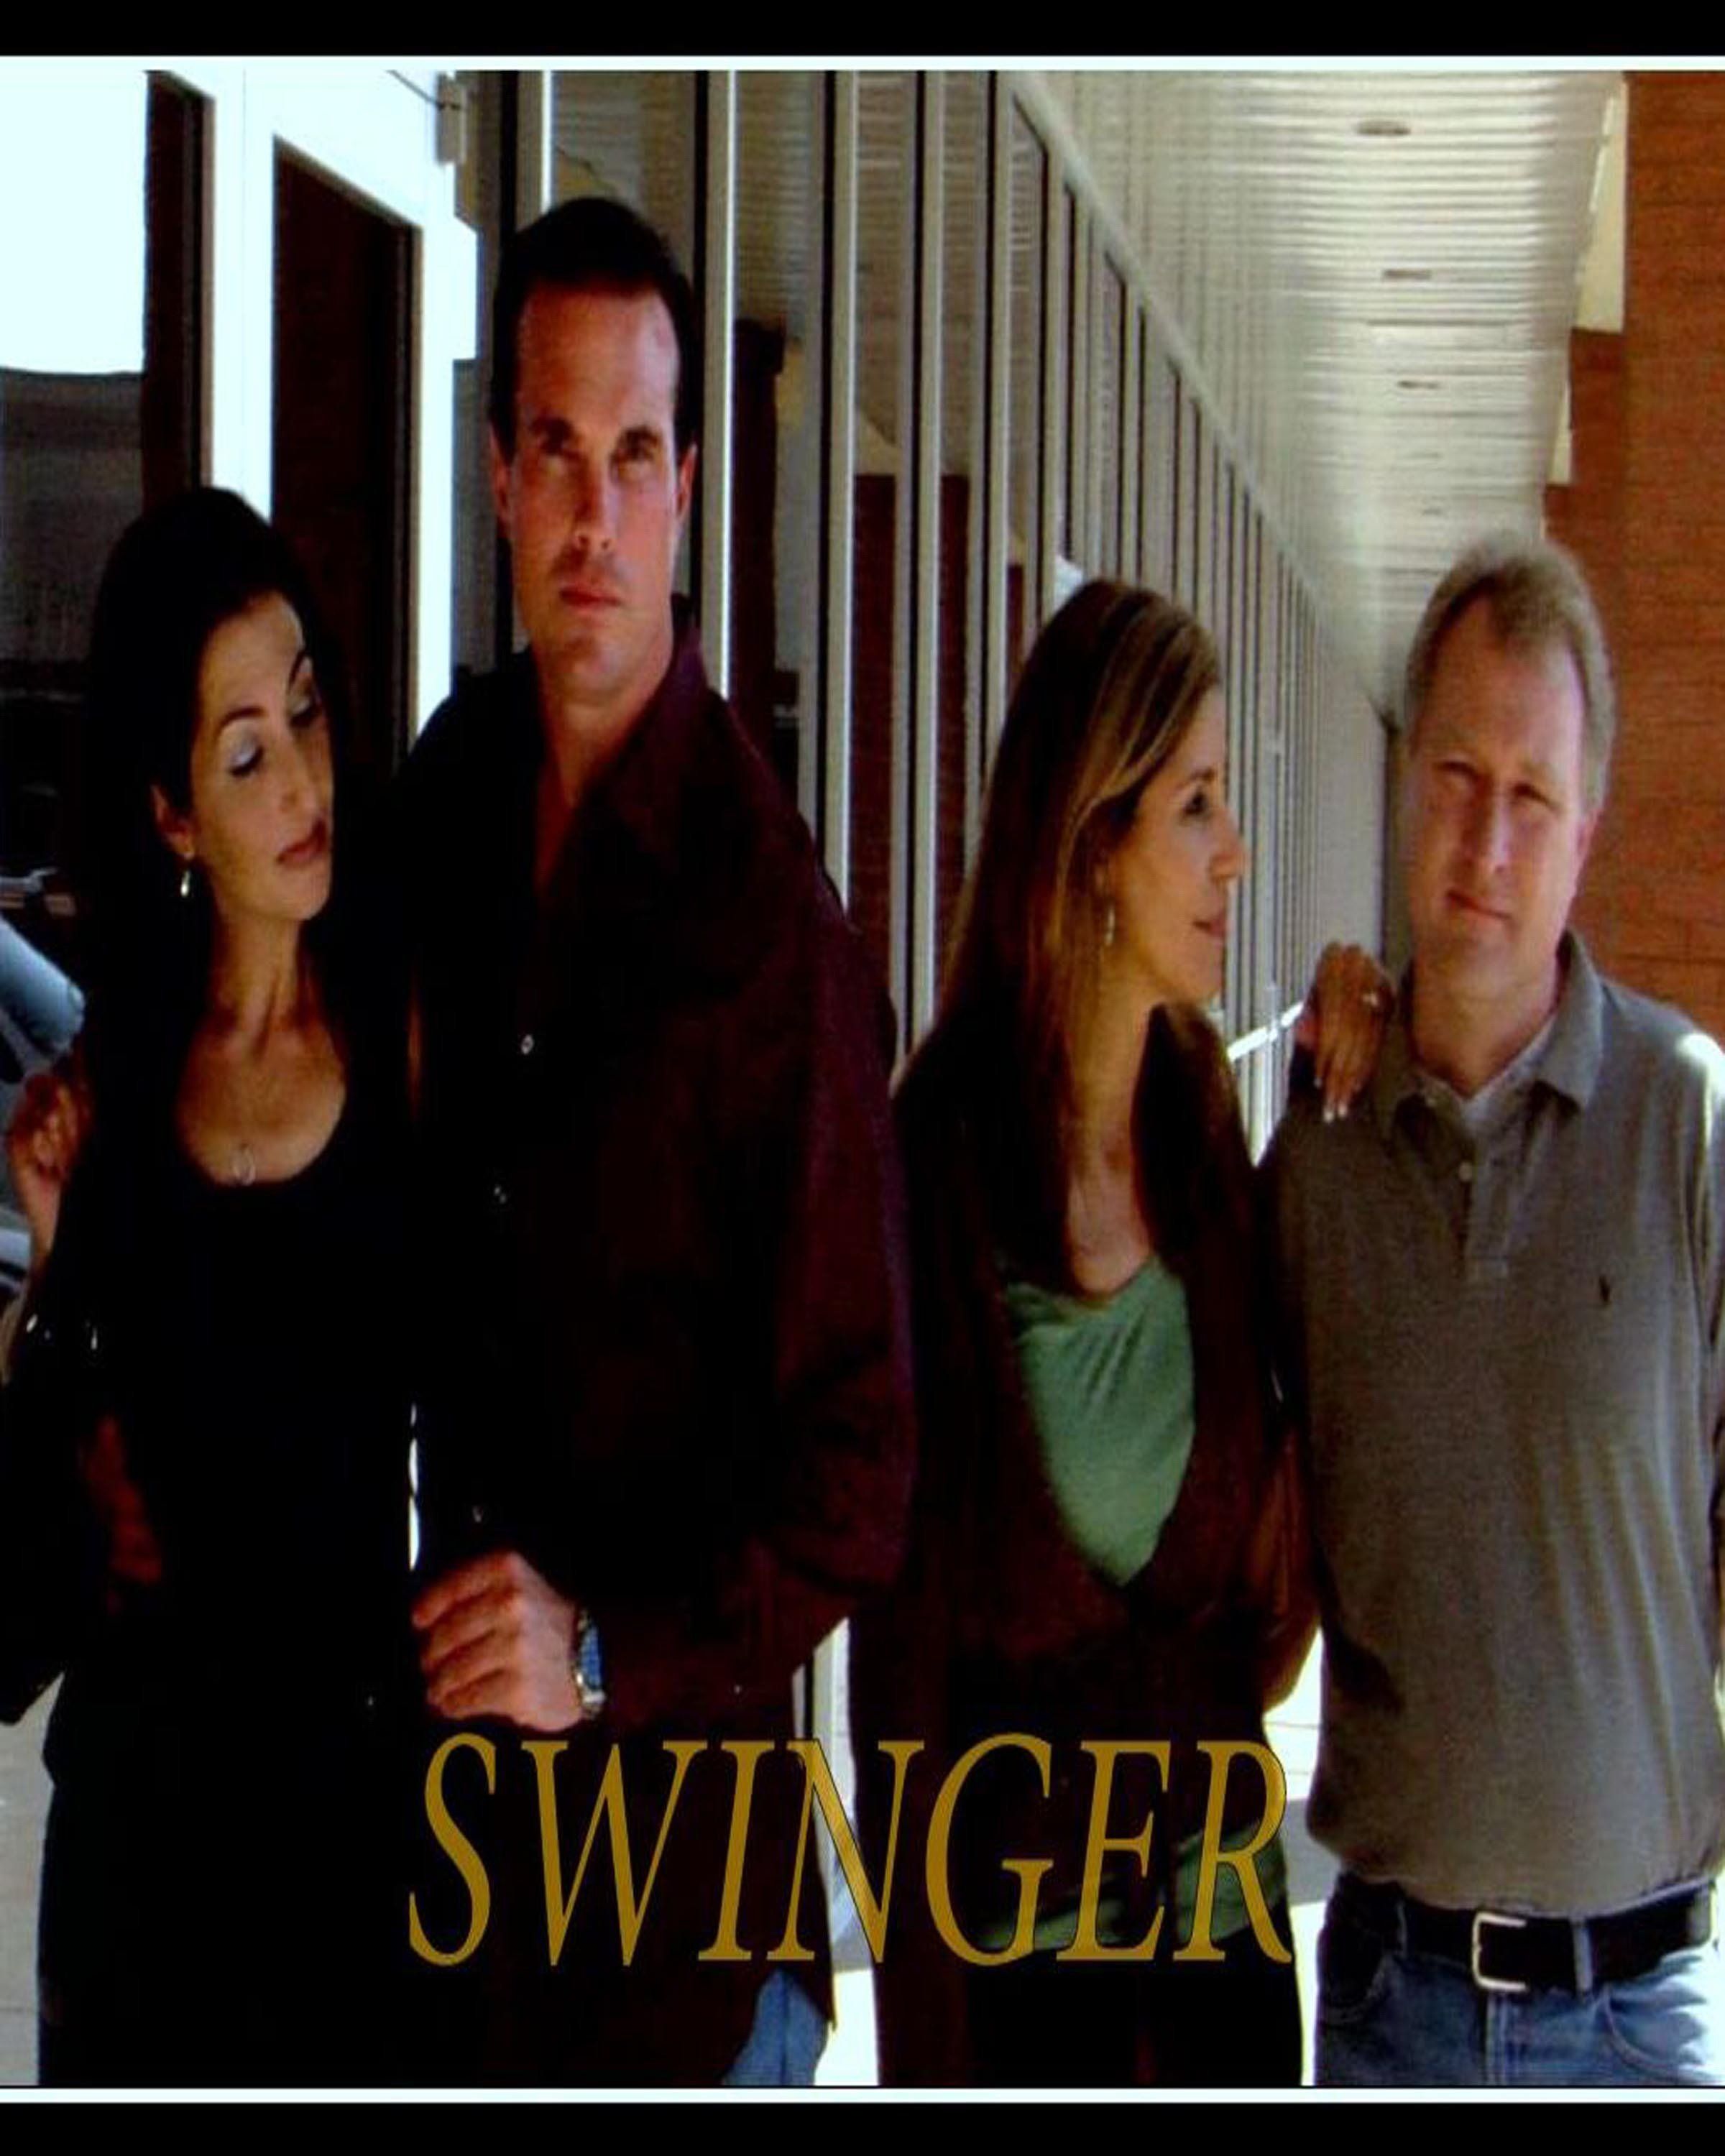 Swinger pictures and movies